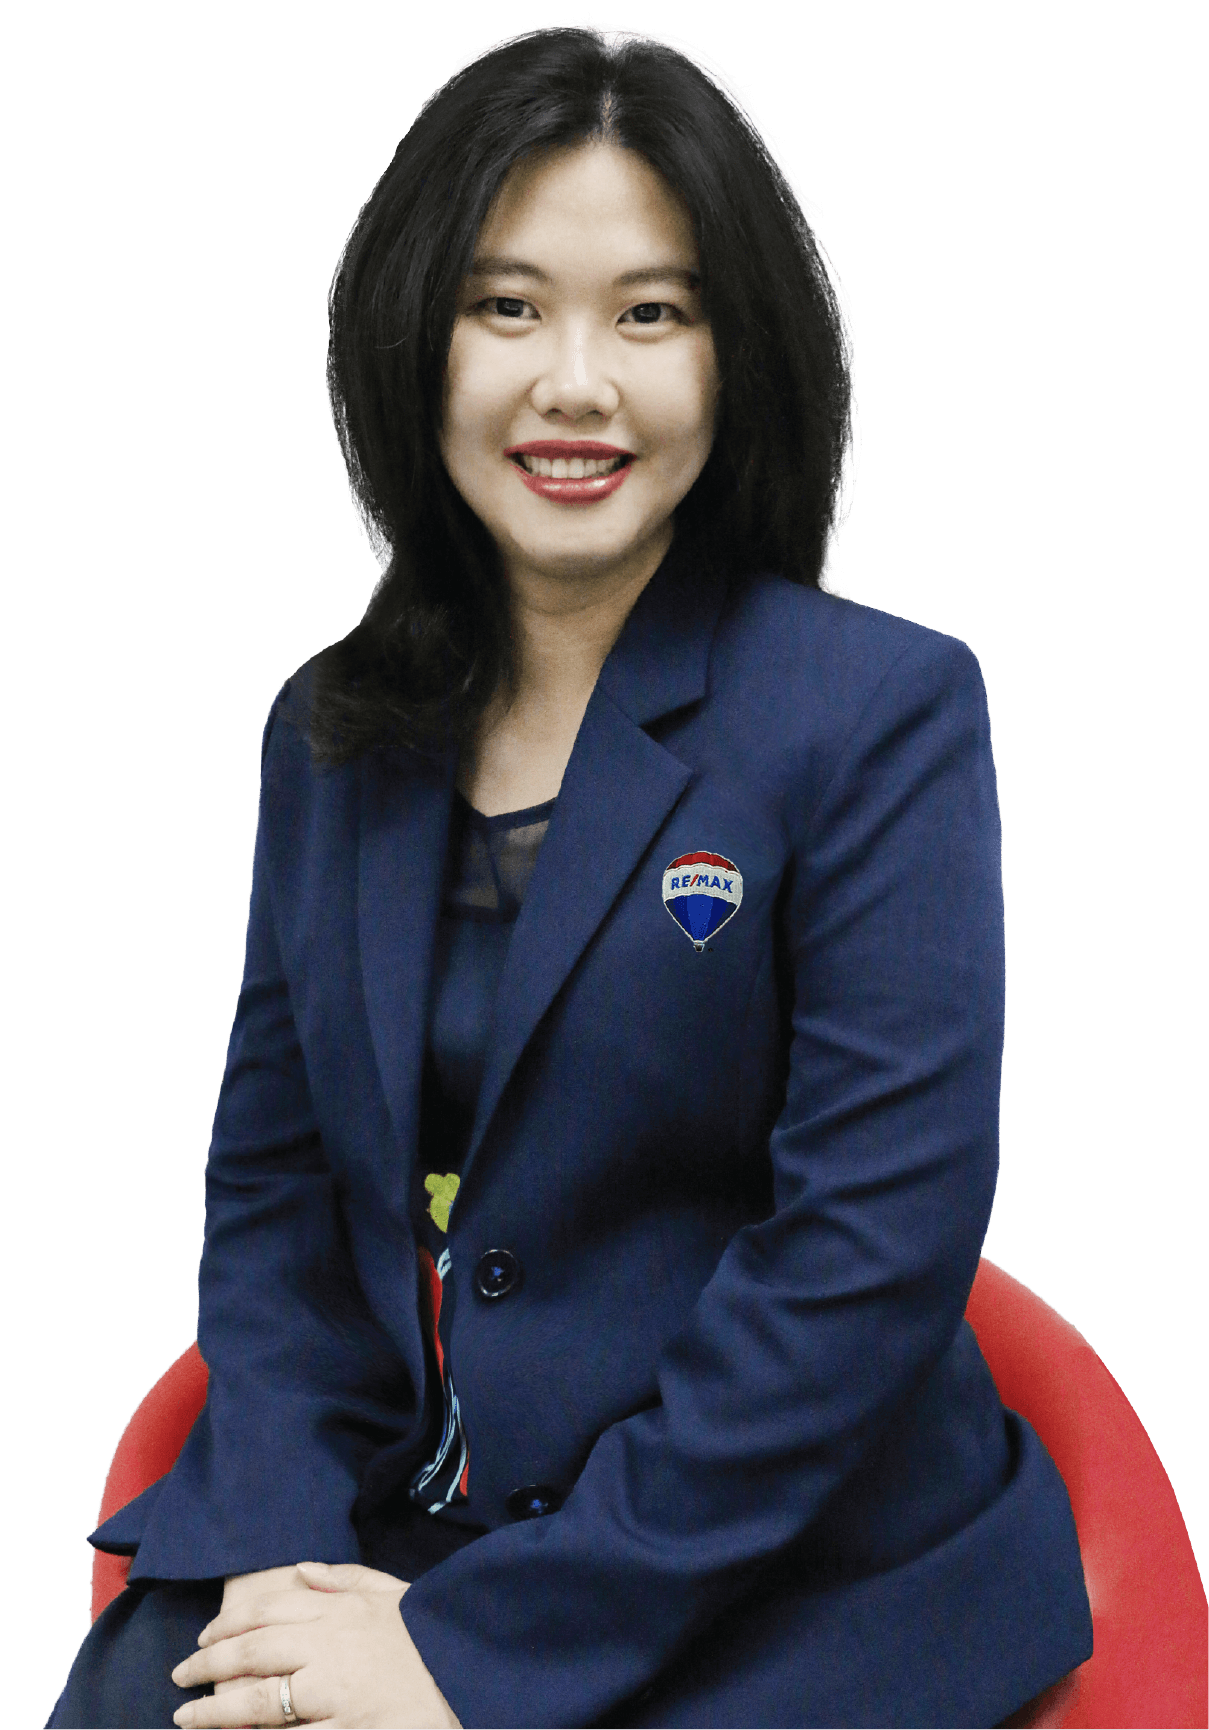 Profile image of CEO of RE/MAX Indonesia